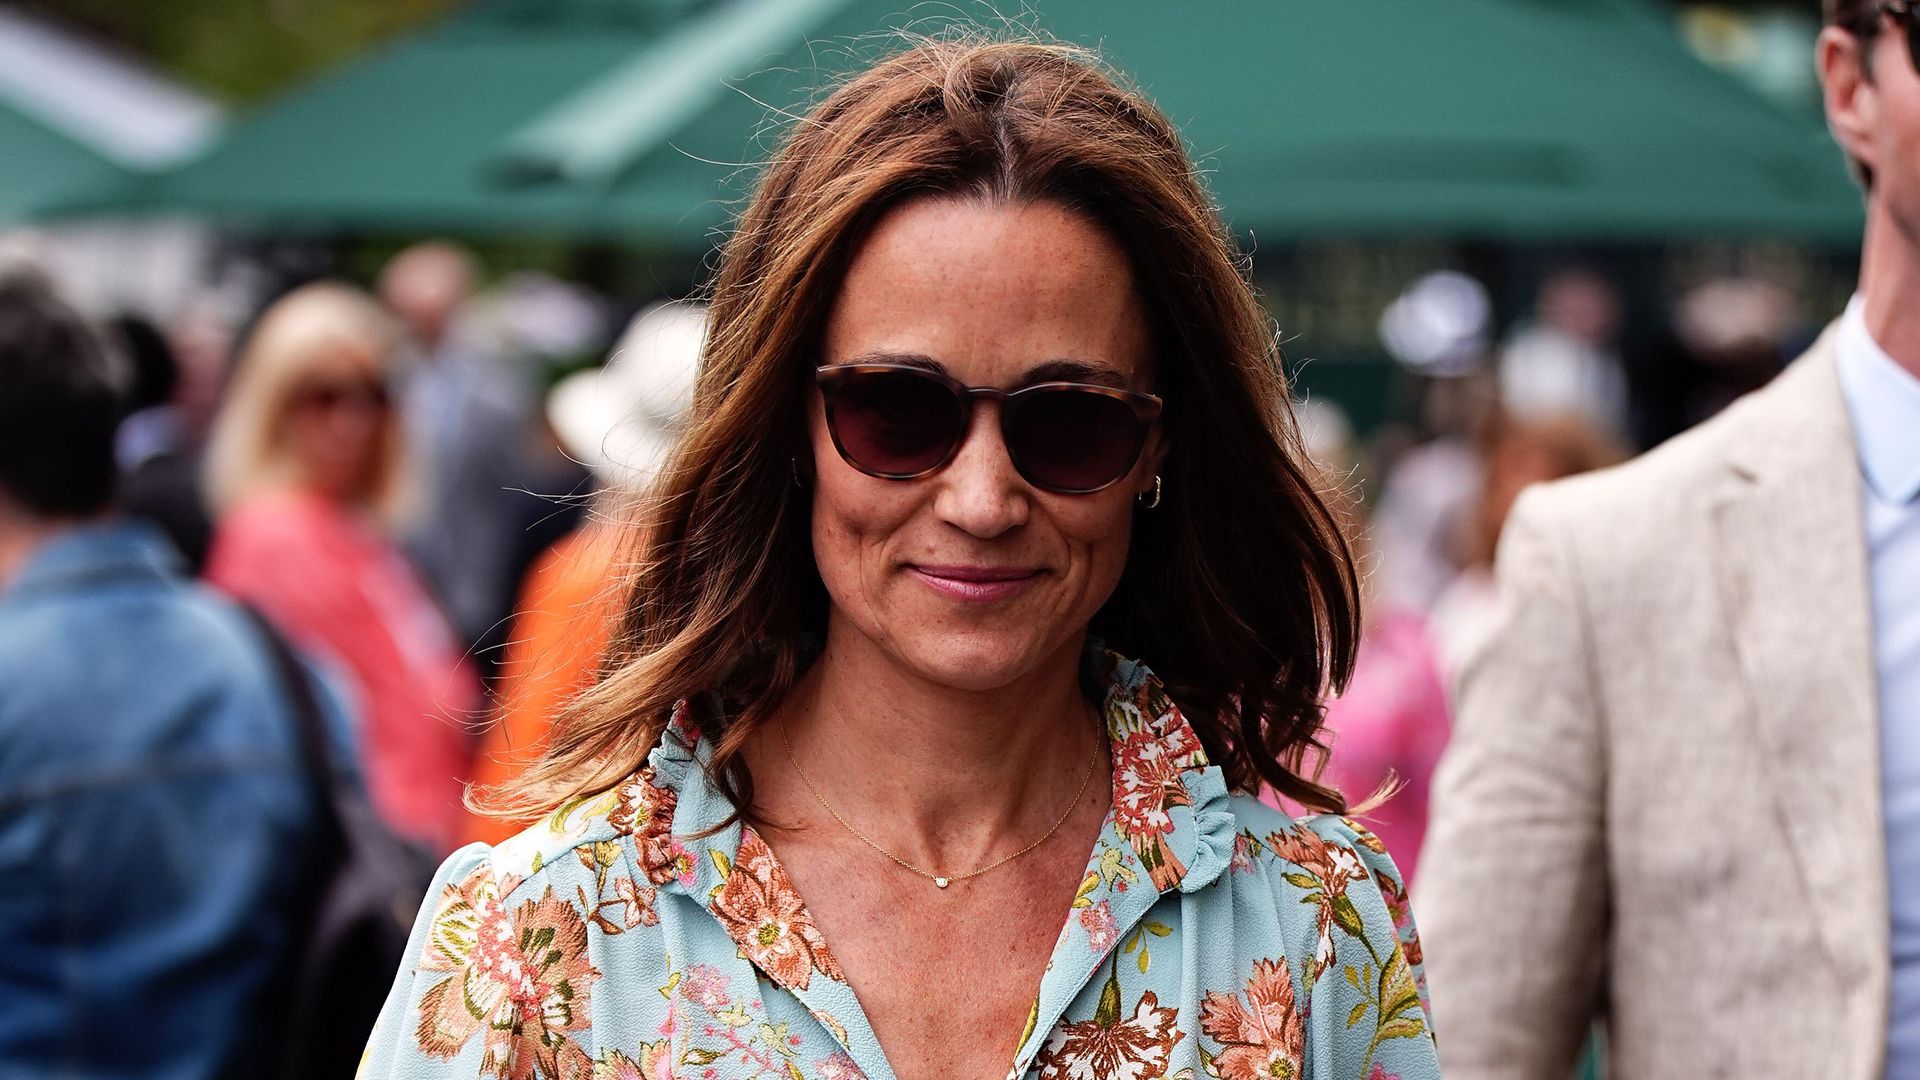 Pippa Middleton in a turquoise floral dress